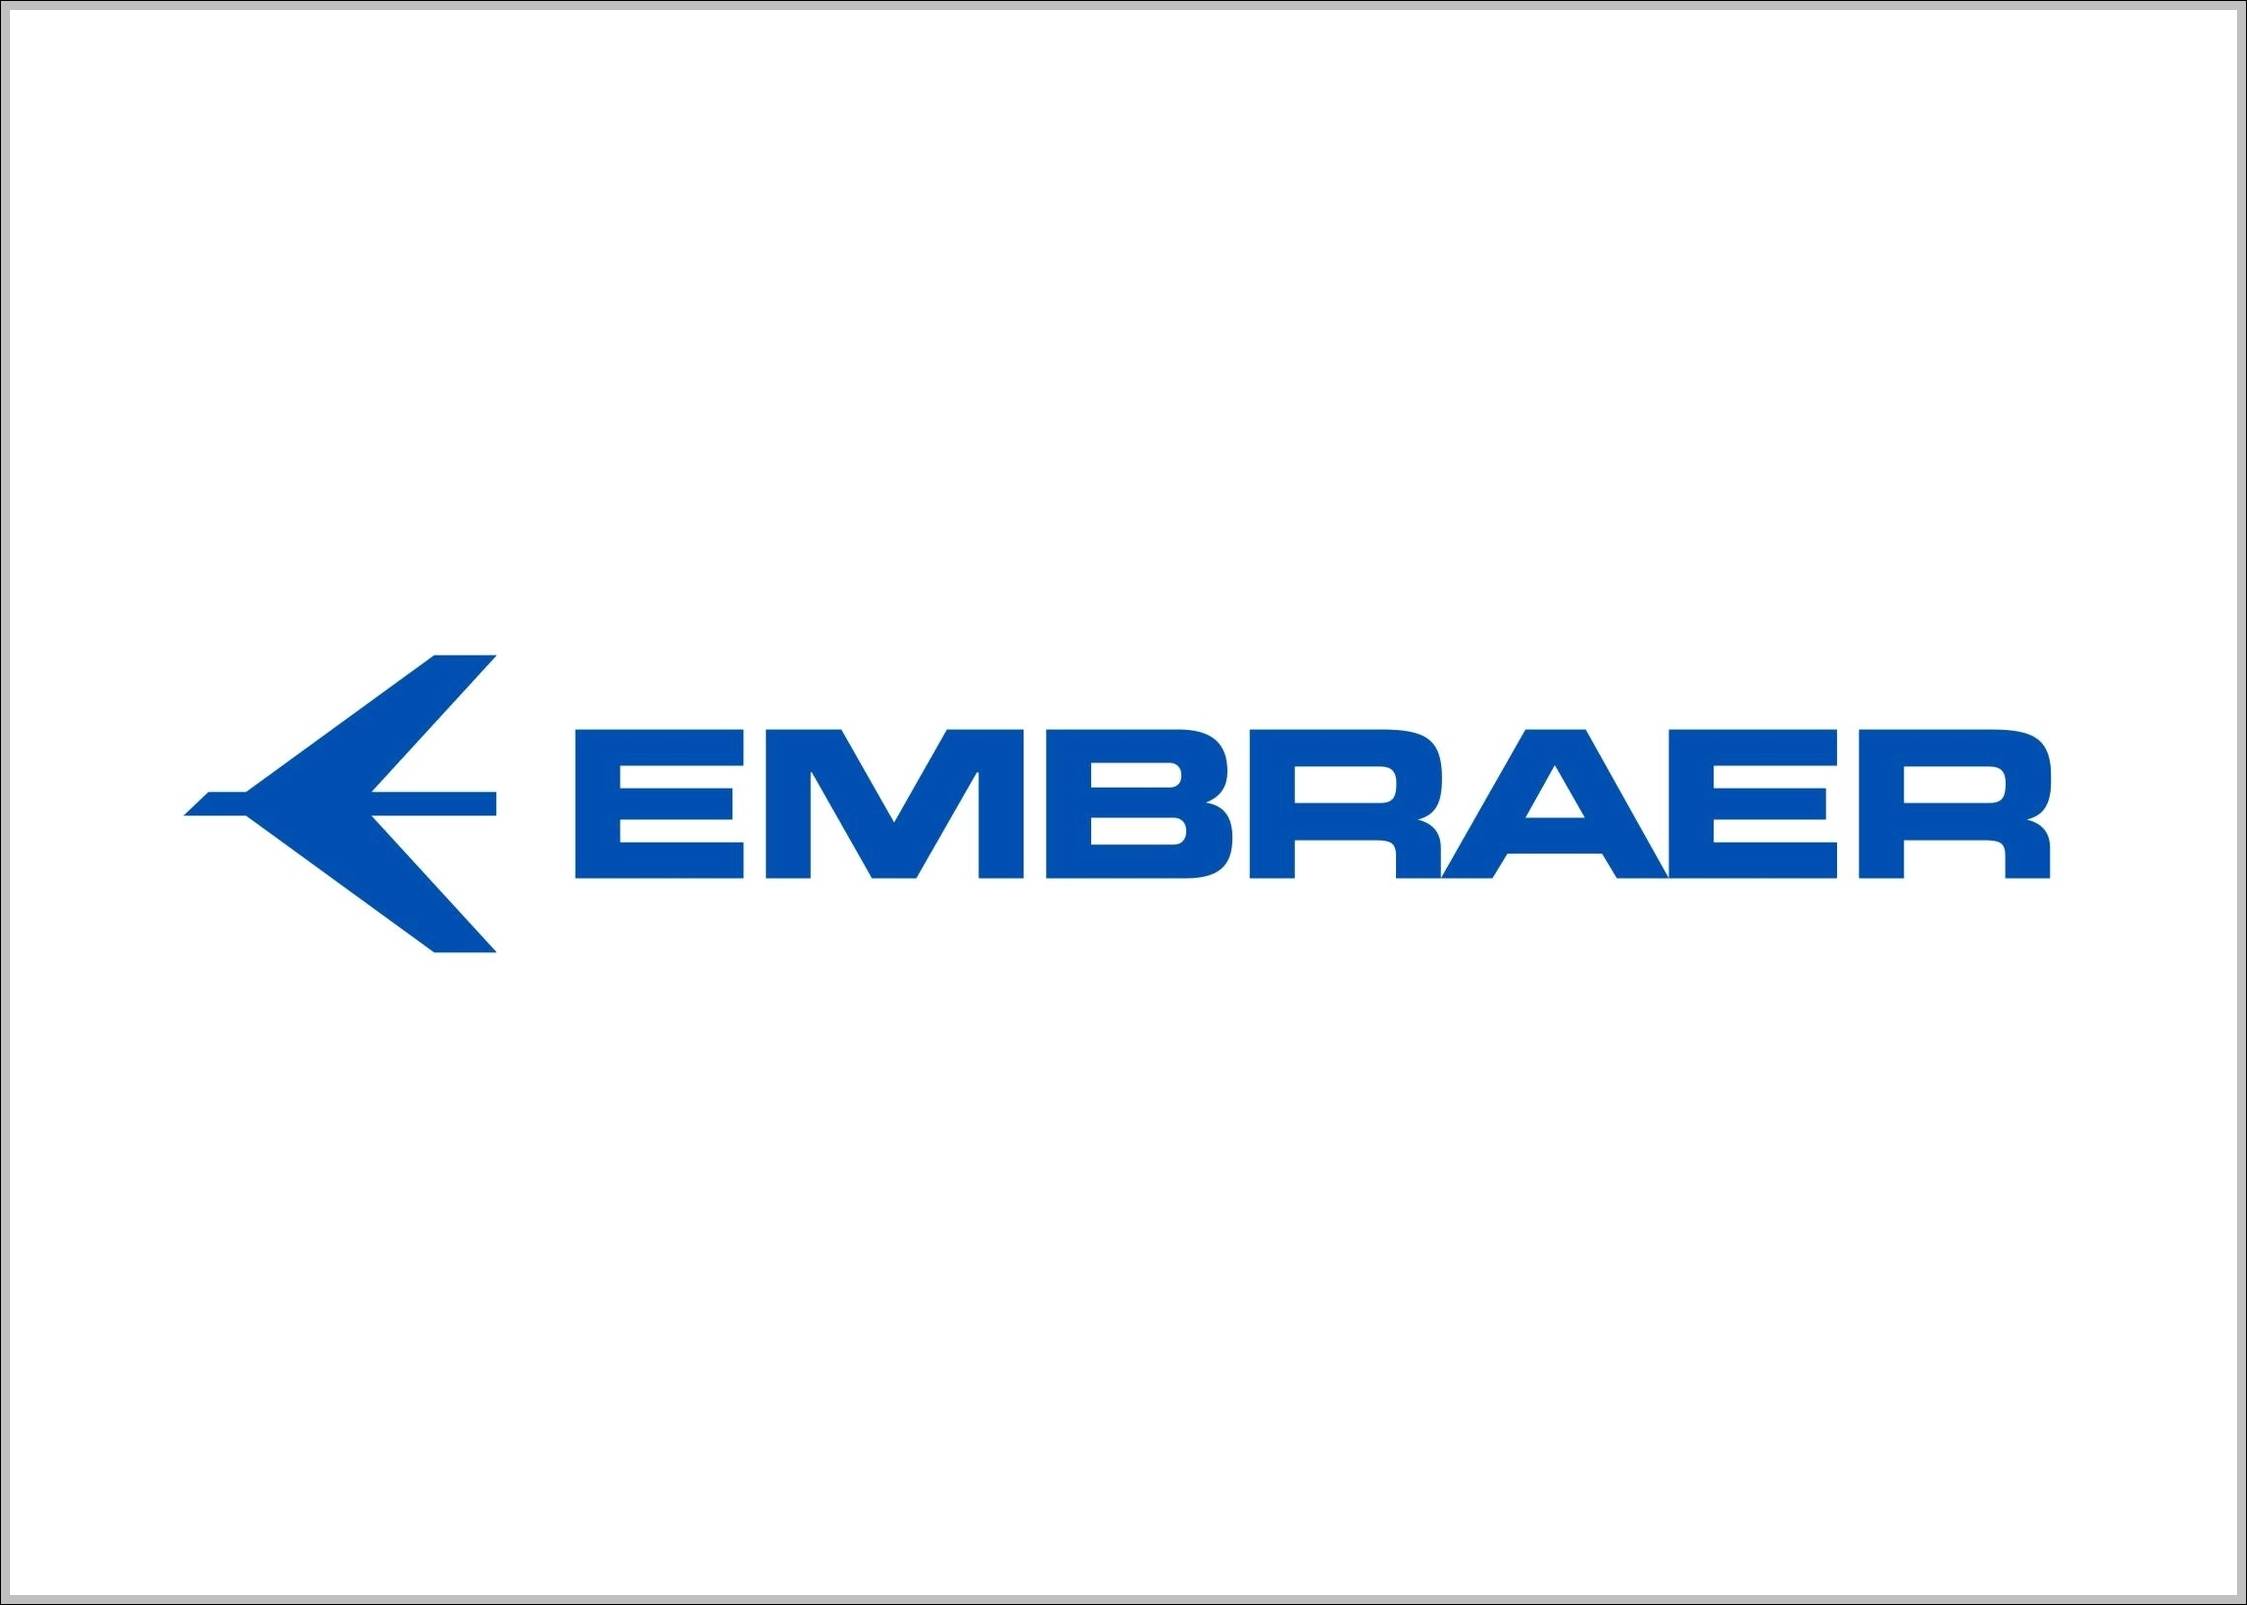 Embraer logo and sign